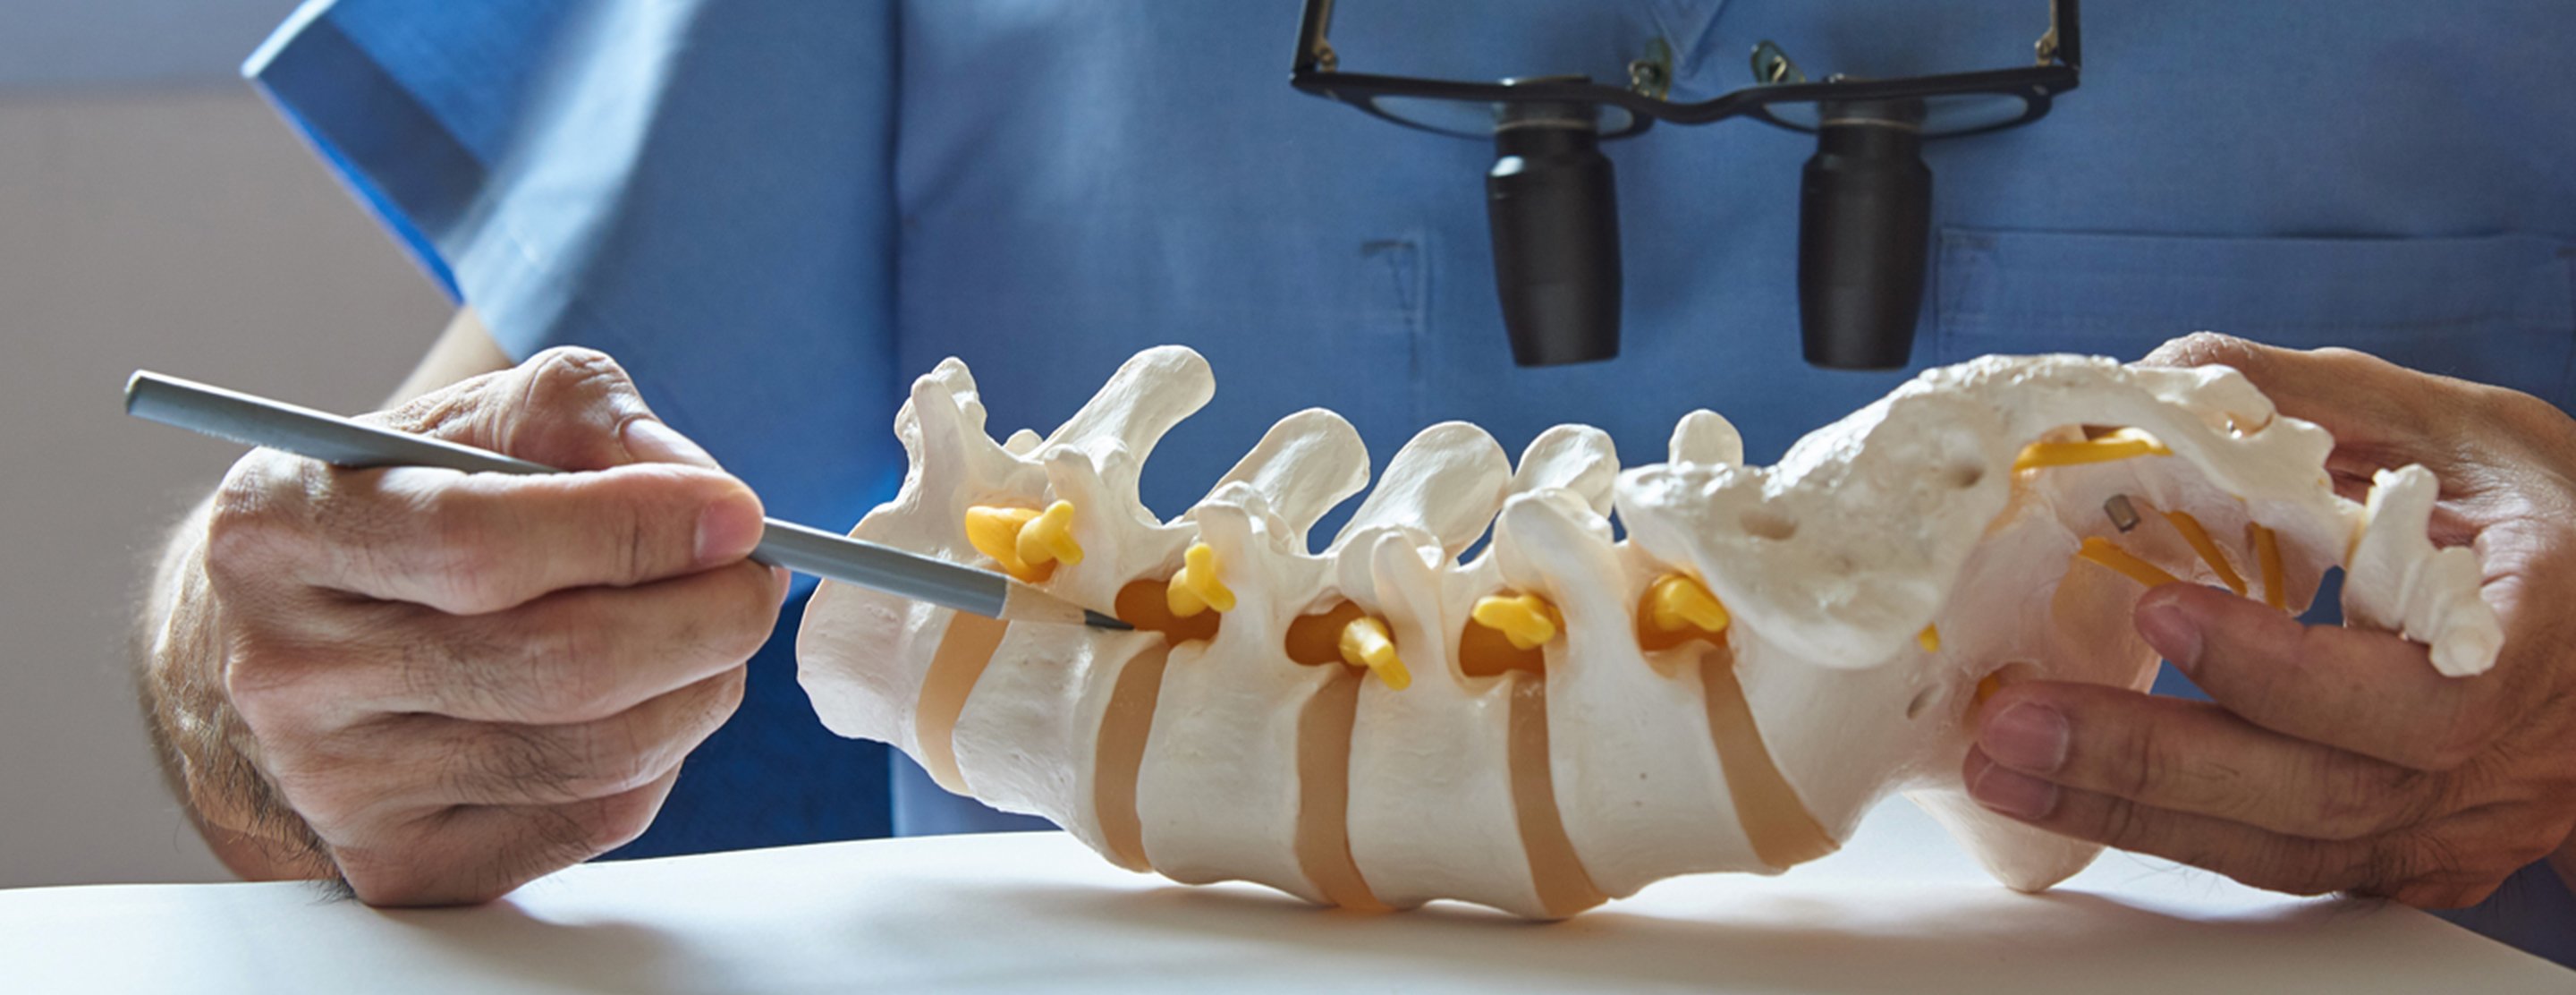 Cervical Disc Replacement – Risks and Benefits